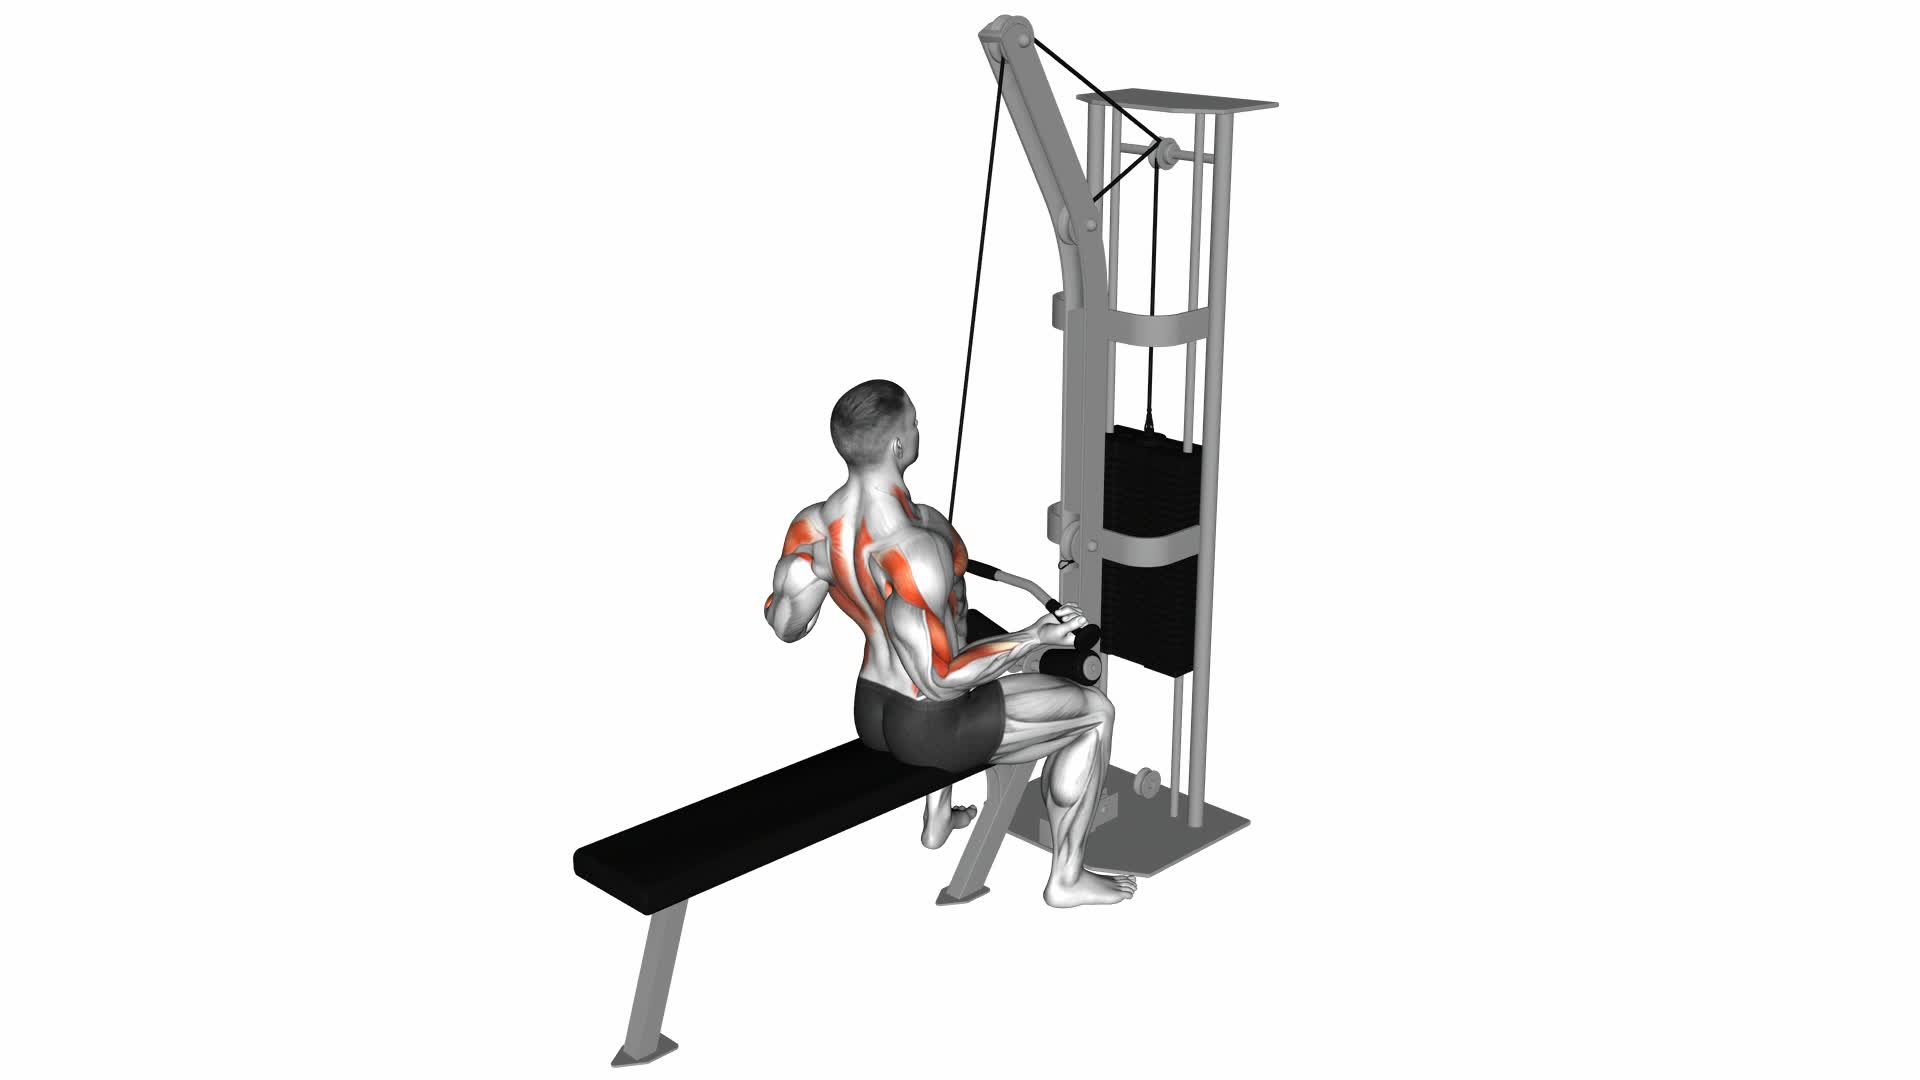 Cable Underhand Pulldown - Video Exercise Guide & Tips